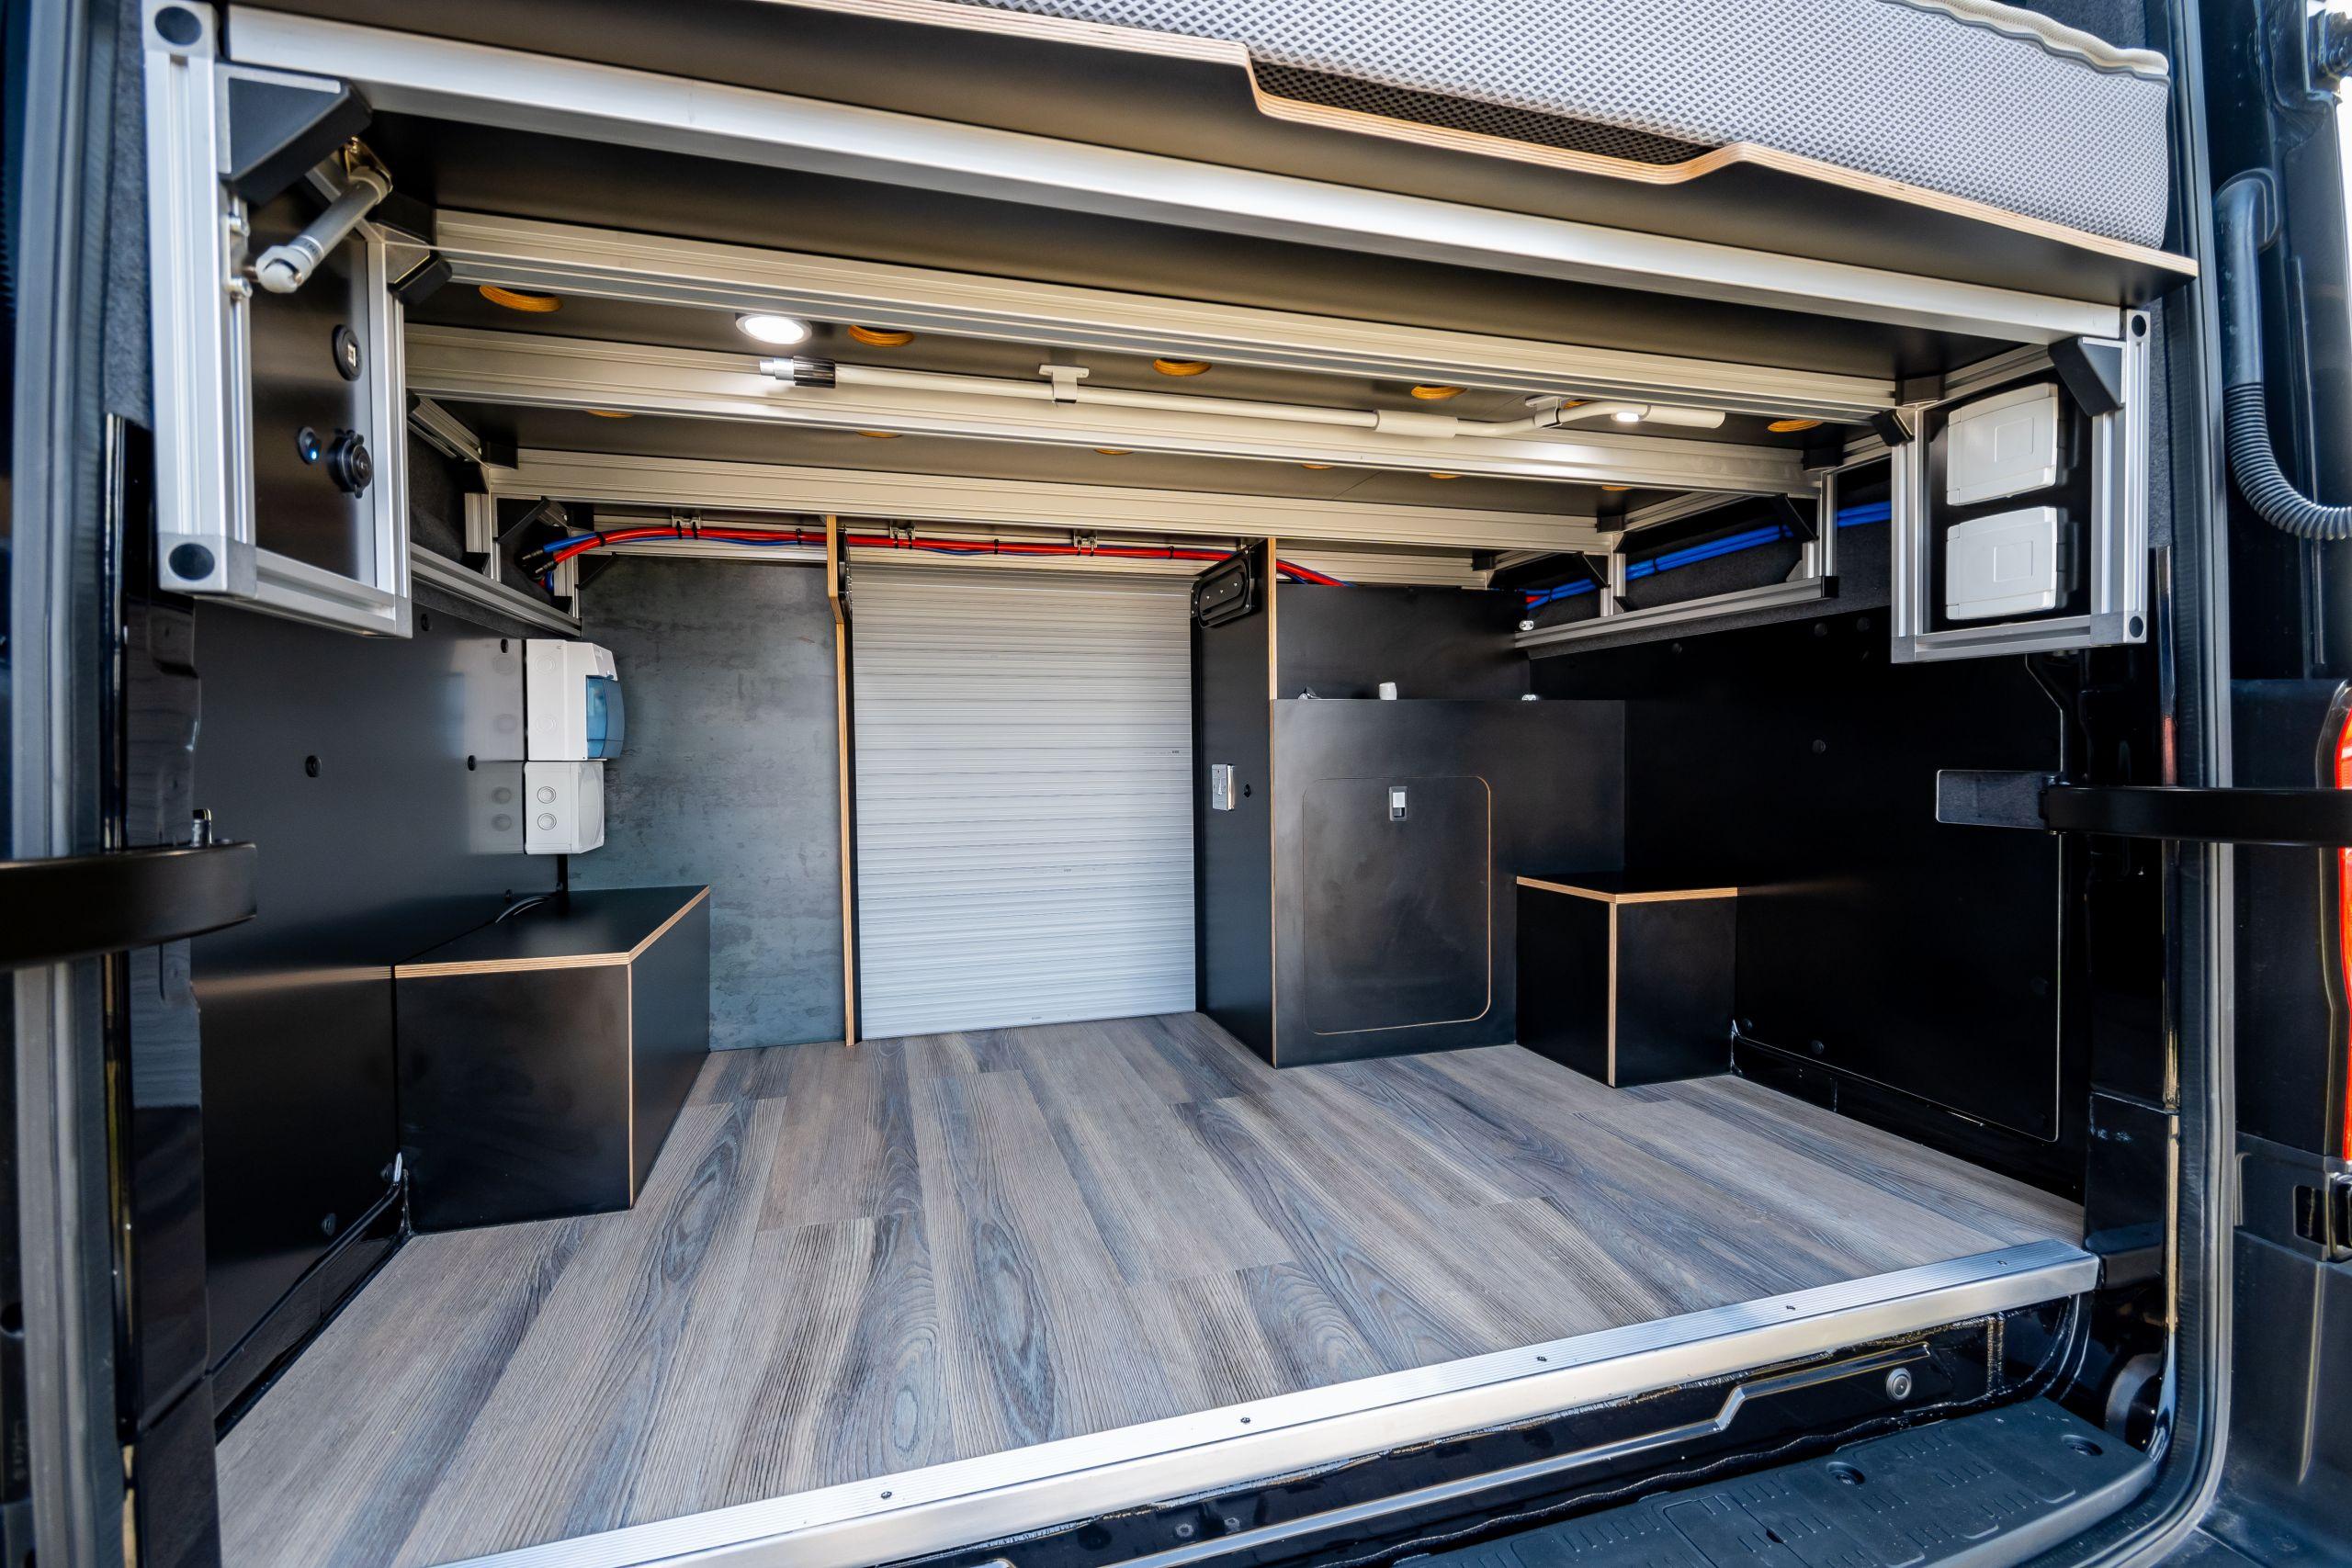 Garage space under the double bed